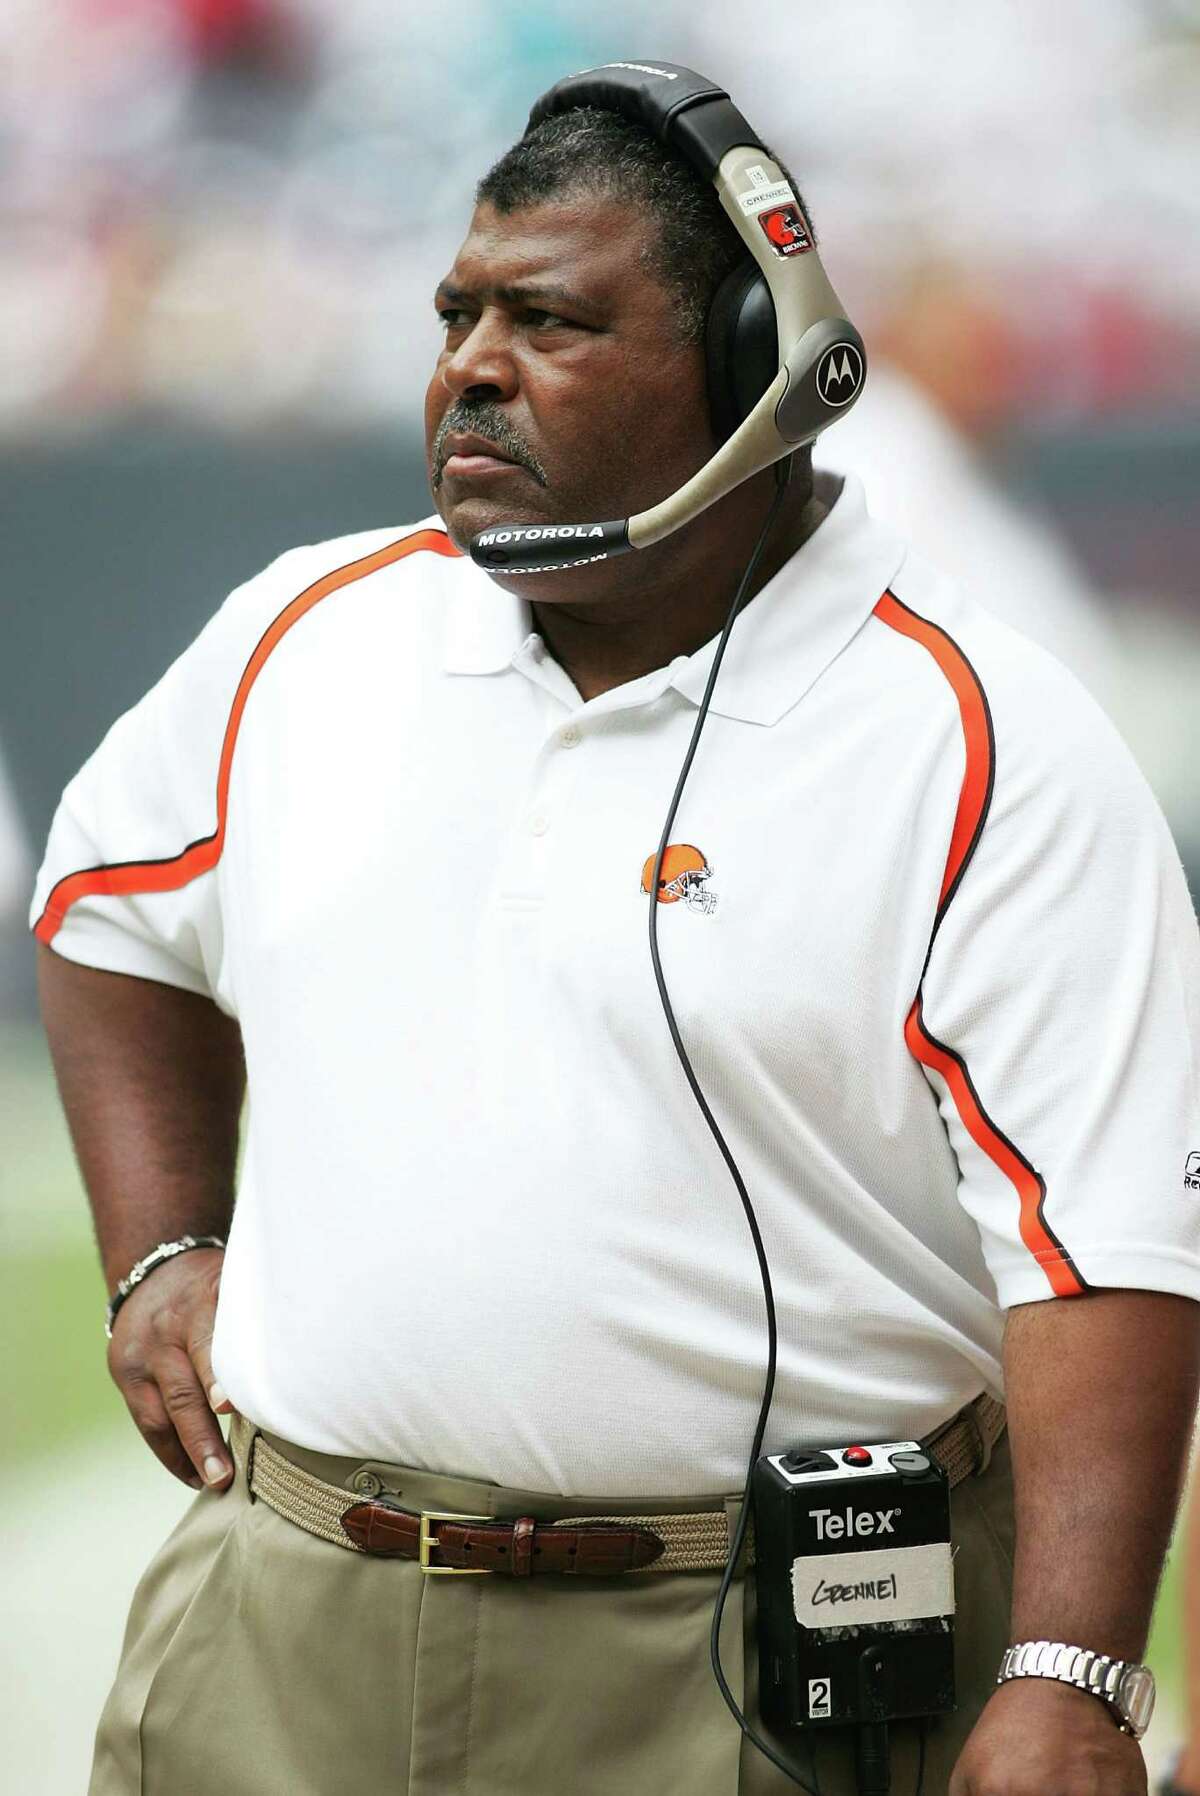 HOUSTON - OCTOBER 30: Head coach Romeo Crennel of the Cleveland Browns watches as his team is defeated by the Houston Texans on October 30, 2005 at Reliant Stadium in Houston, Texas. The Texans defeated the Browns 19-16 for their first victory of the year. (Photo by Doug Benc/Getty Images) *** Local Caption *** Romeo Crennel